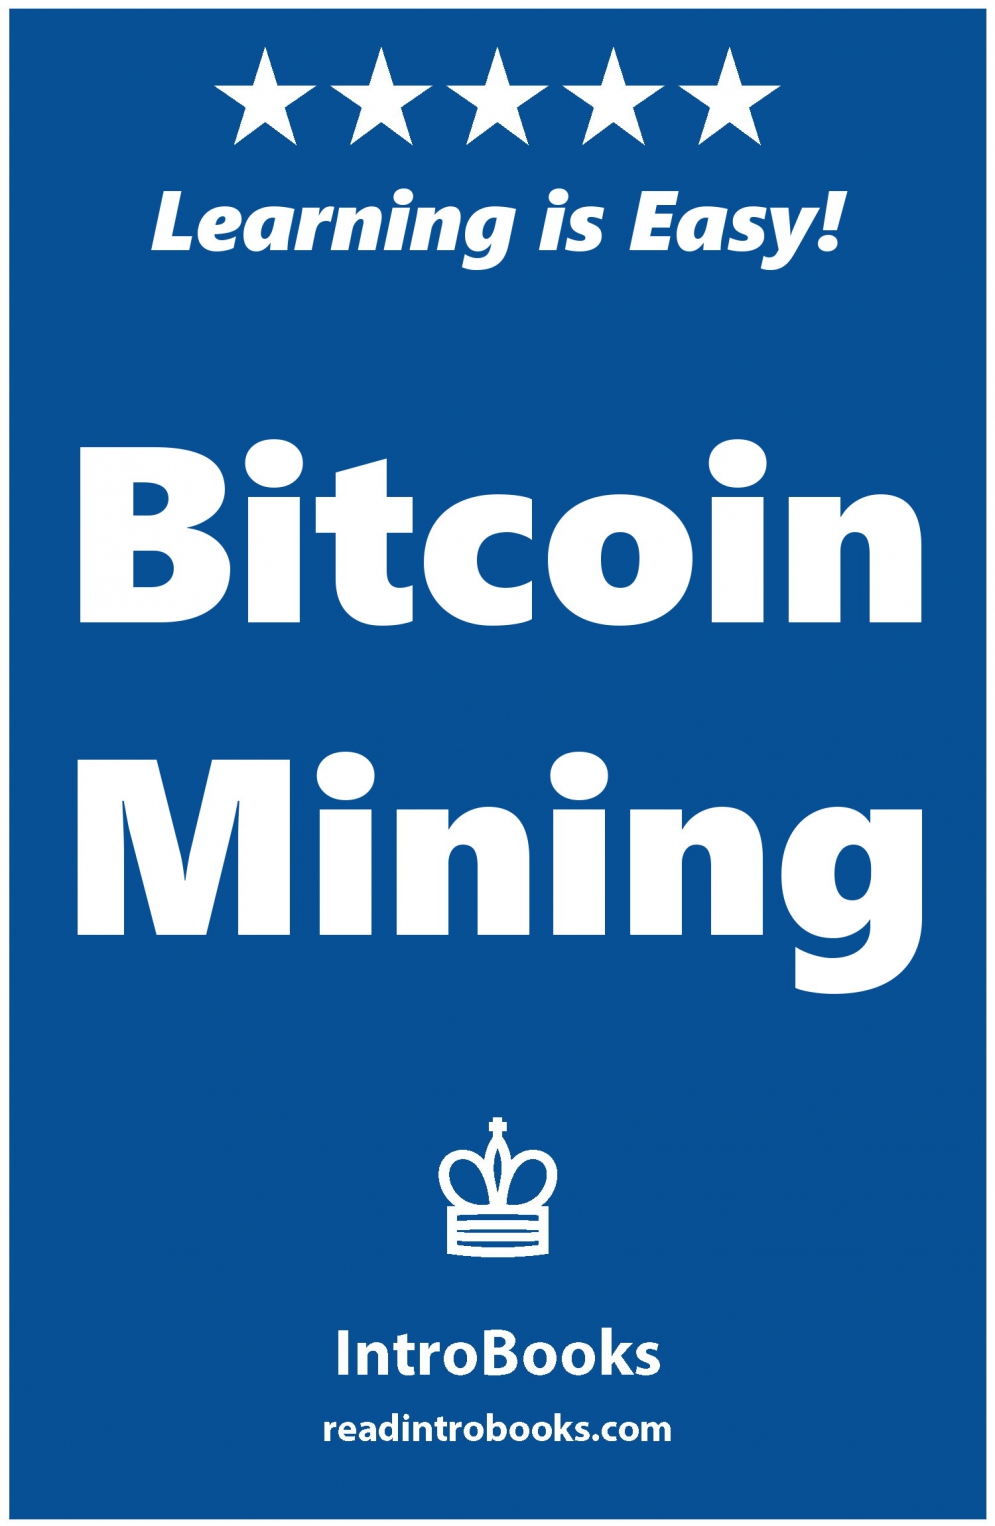 Bitcoin Mining by Can Akdeniz Delivers Up To The Minute Information Covering Everything On #Bitcoin @matrixthinker #blockchain #books #ripple #digitalcurrency #cryptocurrency